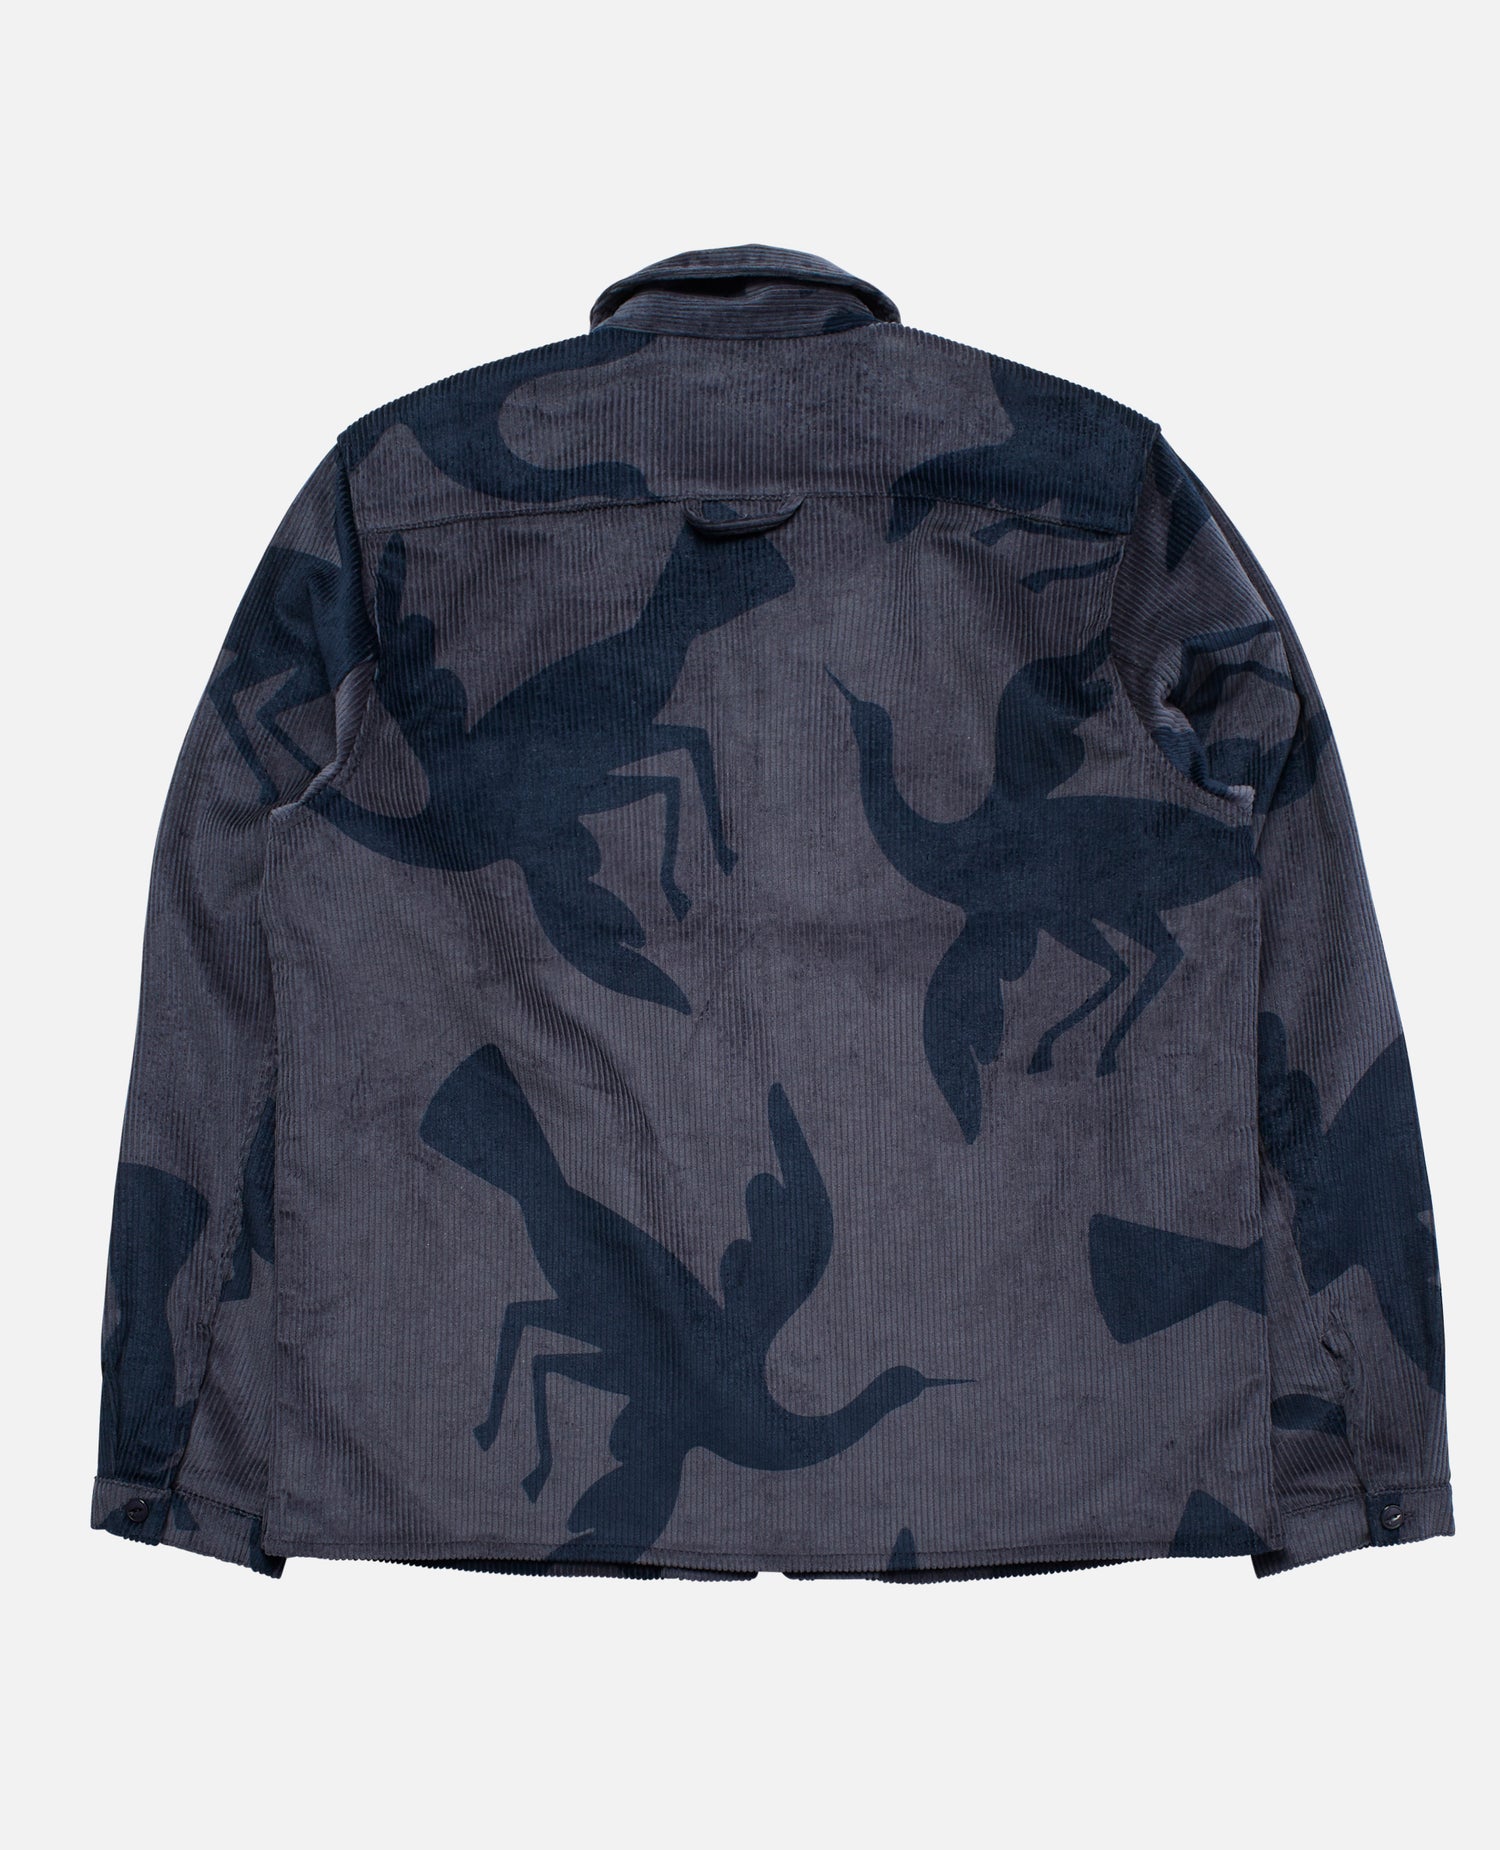 by Parra Clipped Wings Shirt Jacket (Greyish Blue)